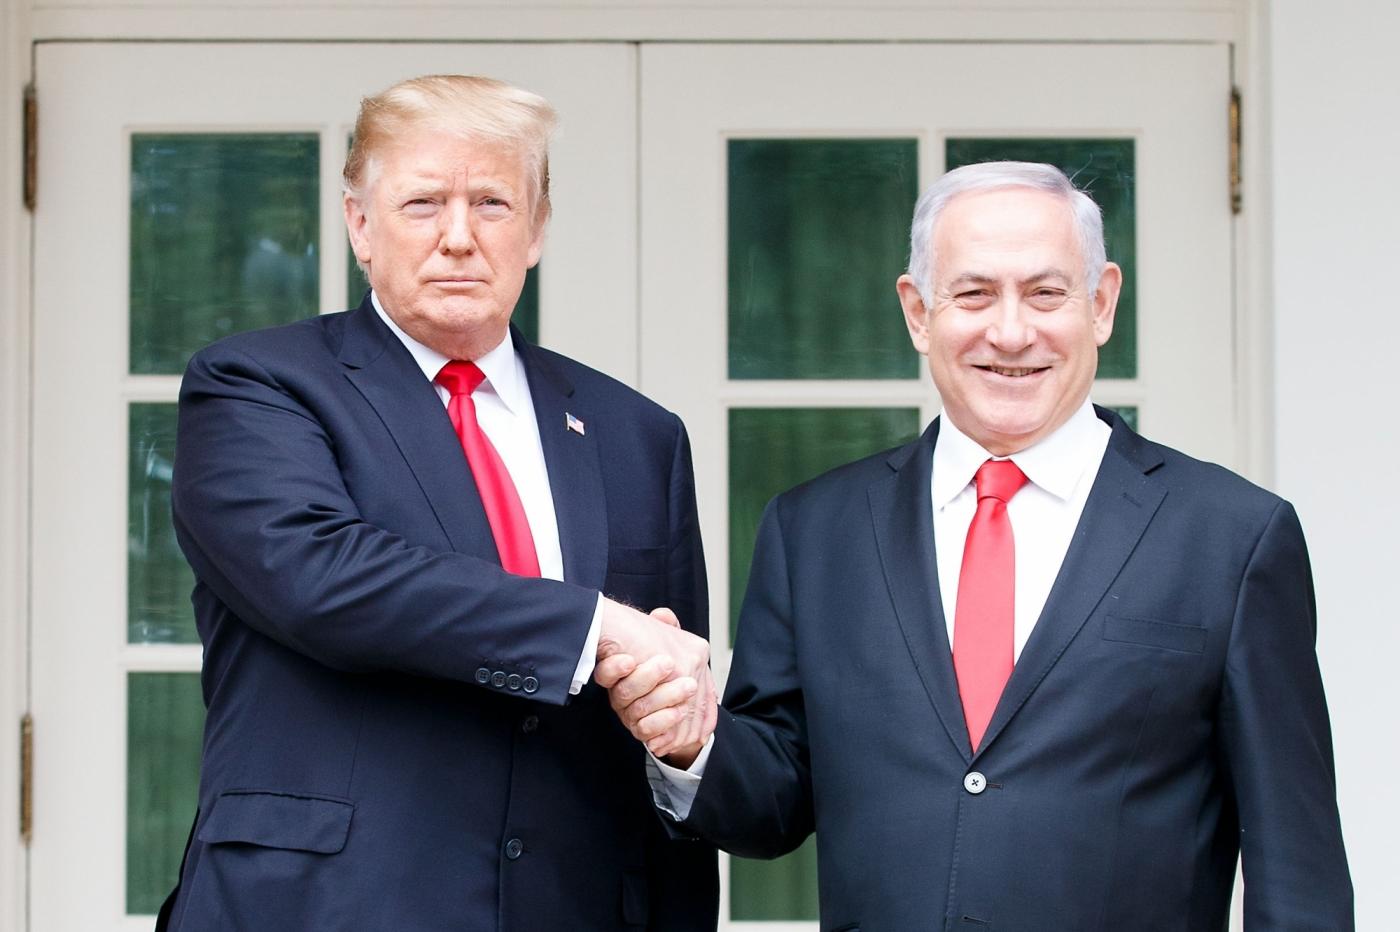 WASHINGTON, March 25, 2019 (Xinhua) -- U.S. President Donald Trump (L) shakes hands with Israeli Prime Minister Benjamin Netanyahu during their meeting at the White House in Washington D.C., the United States, on March 25, 2019. U.S. President Donald Trump on Monday signed a proclamation recognizing Israel's sovereignty over the disputed Golan Heights, territory that Israel seized from Syria in 1967. (Xinhua/Ting Shen/IANS) by . 